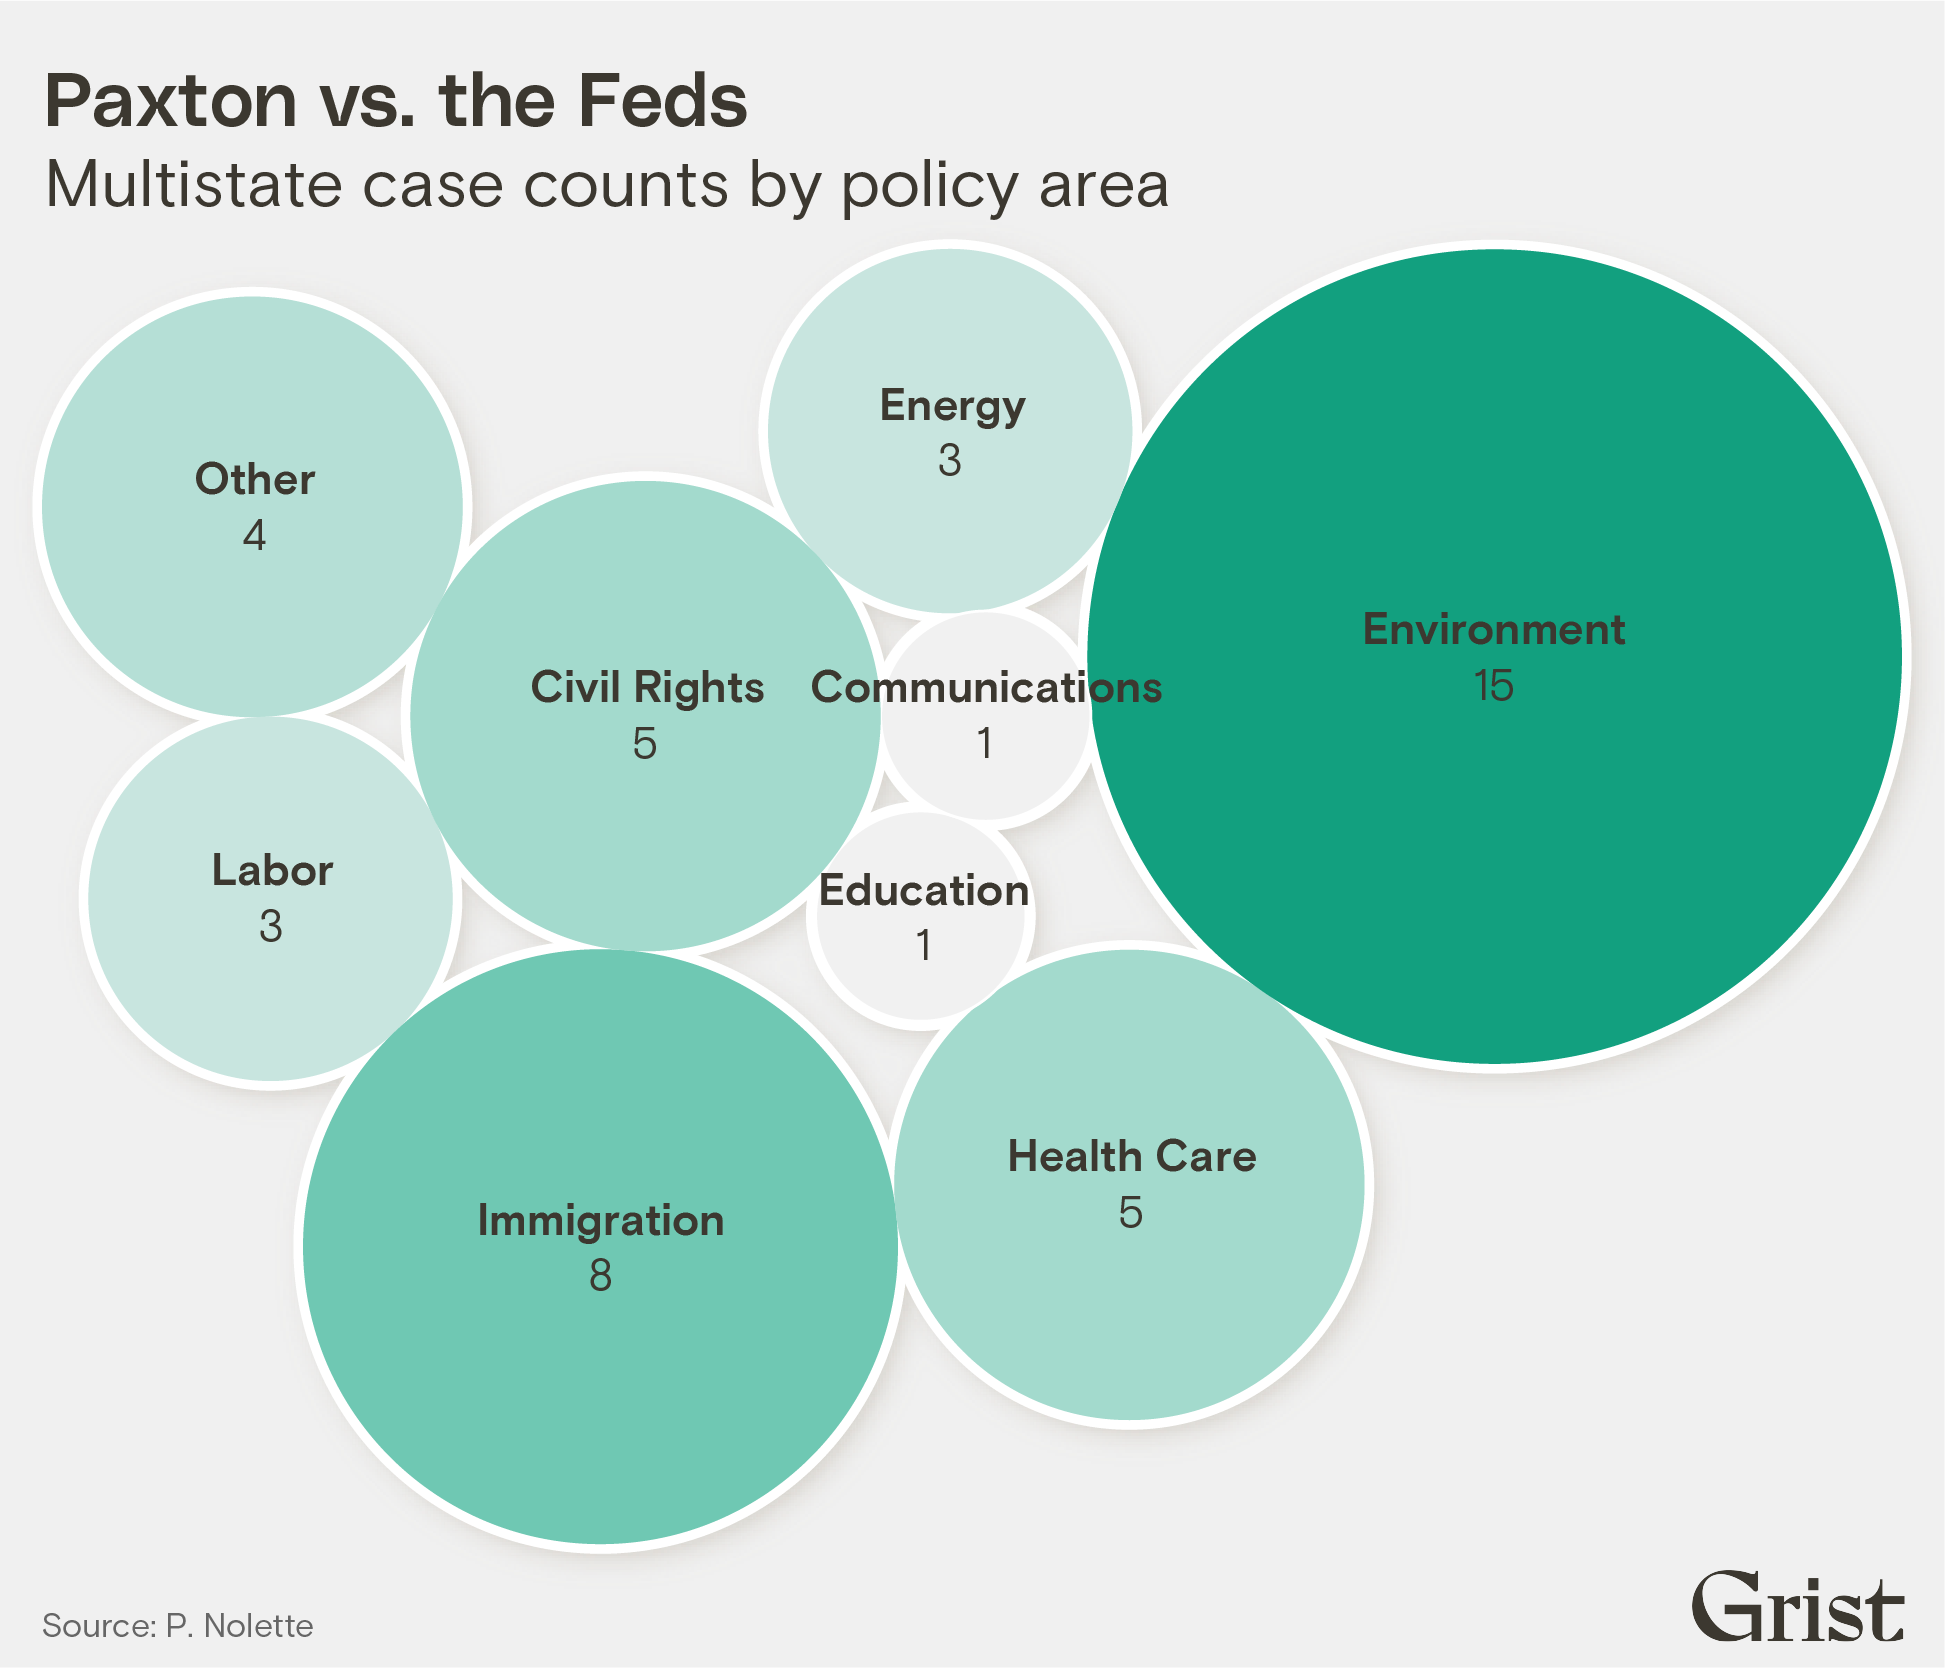 A bubble chart showing Ken Paxton's multistate cases by policy area. The largest category is Environment, with 15 cases.